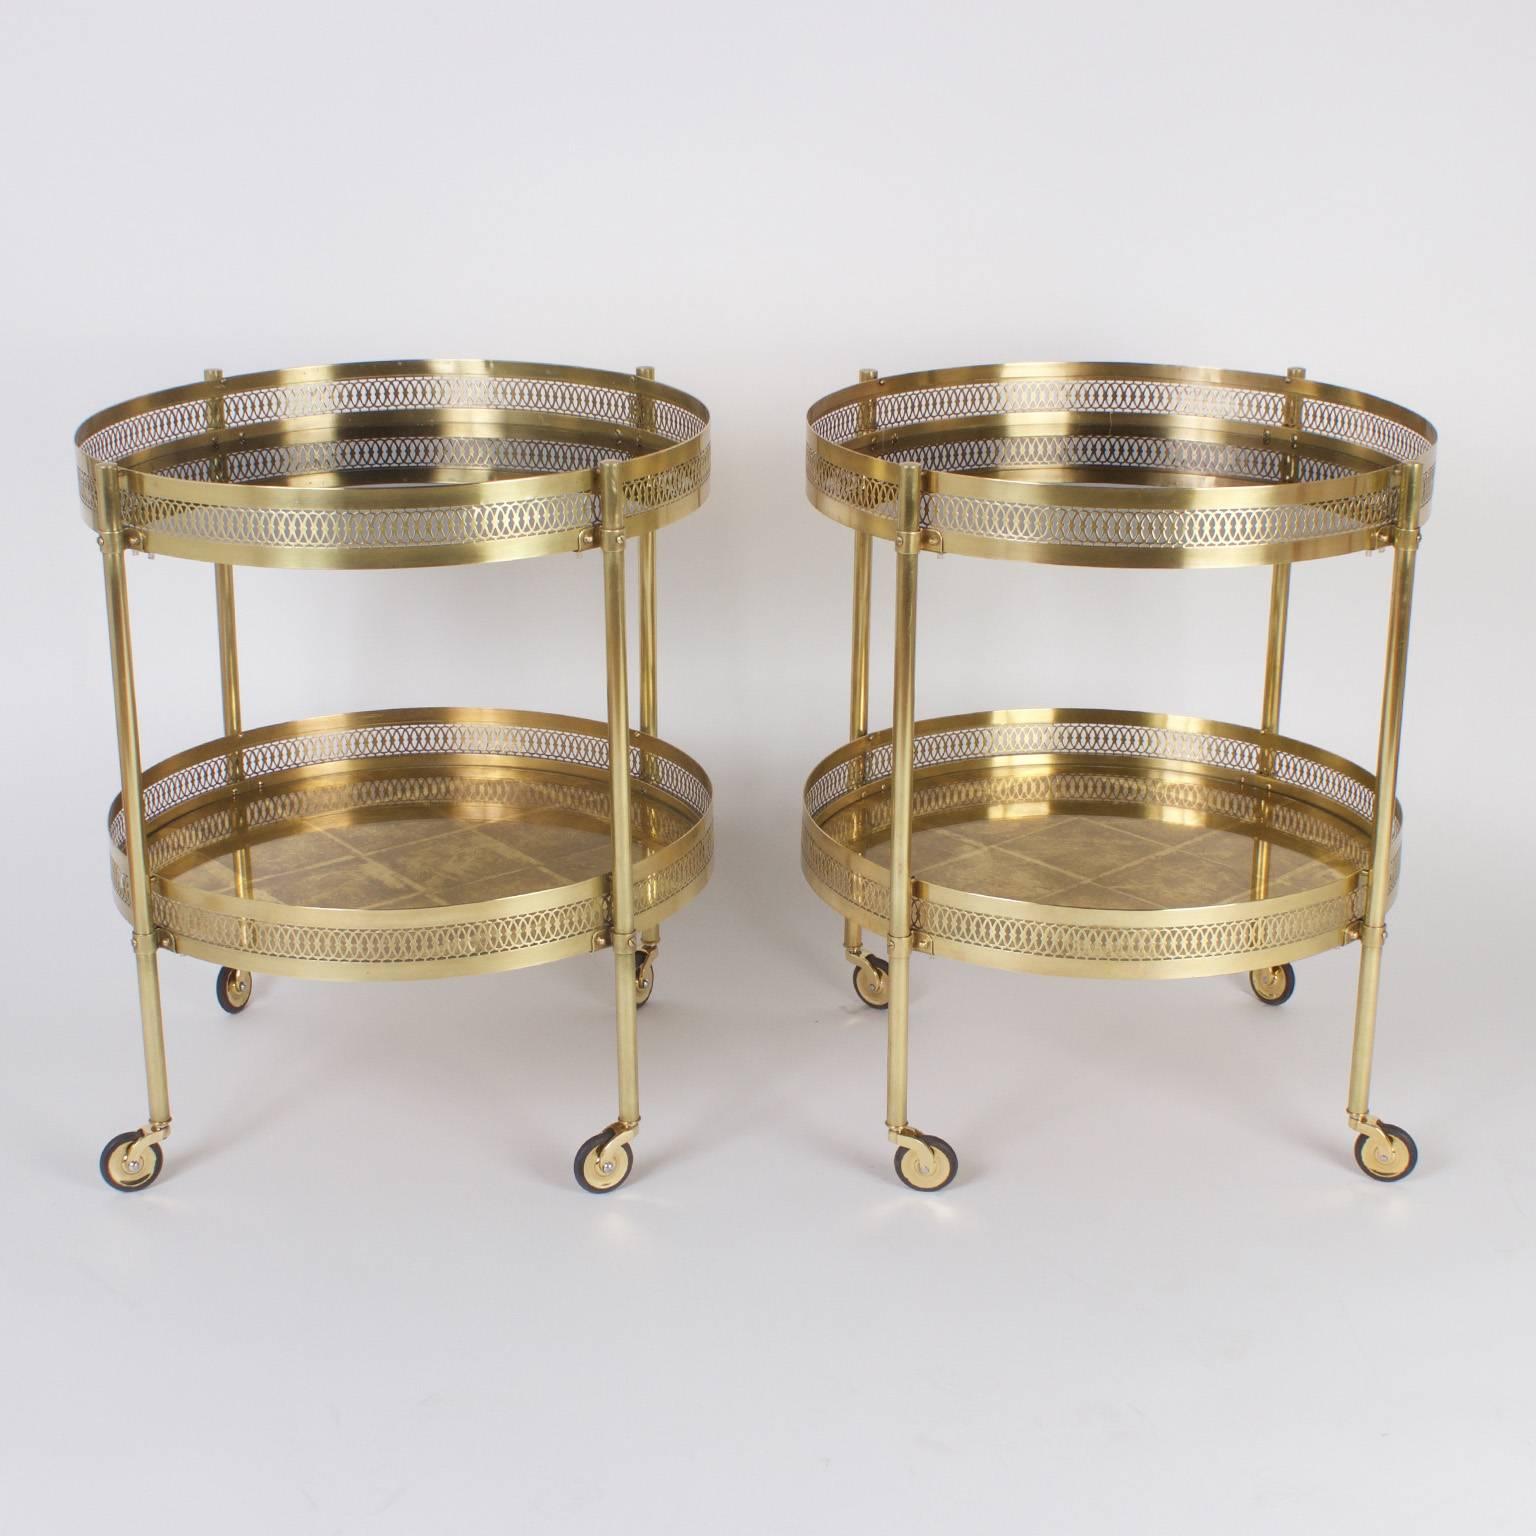 Chic pair of round brass serving carts, tables or trolleys that have a timeless international flair. The two tiered gallery design gives service and storage. The top tier is reverse painted black glass, the bottom is reverse painted gold leaf glass.